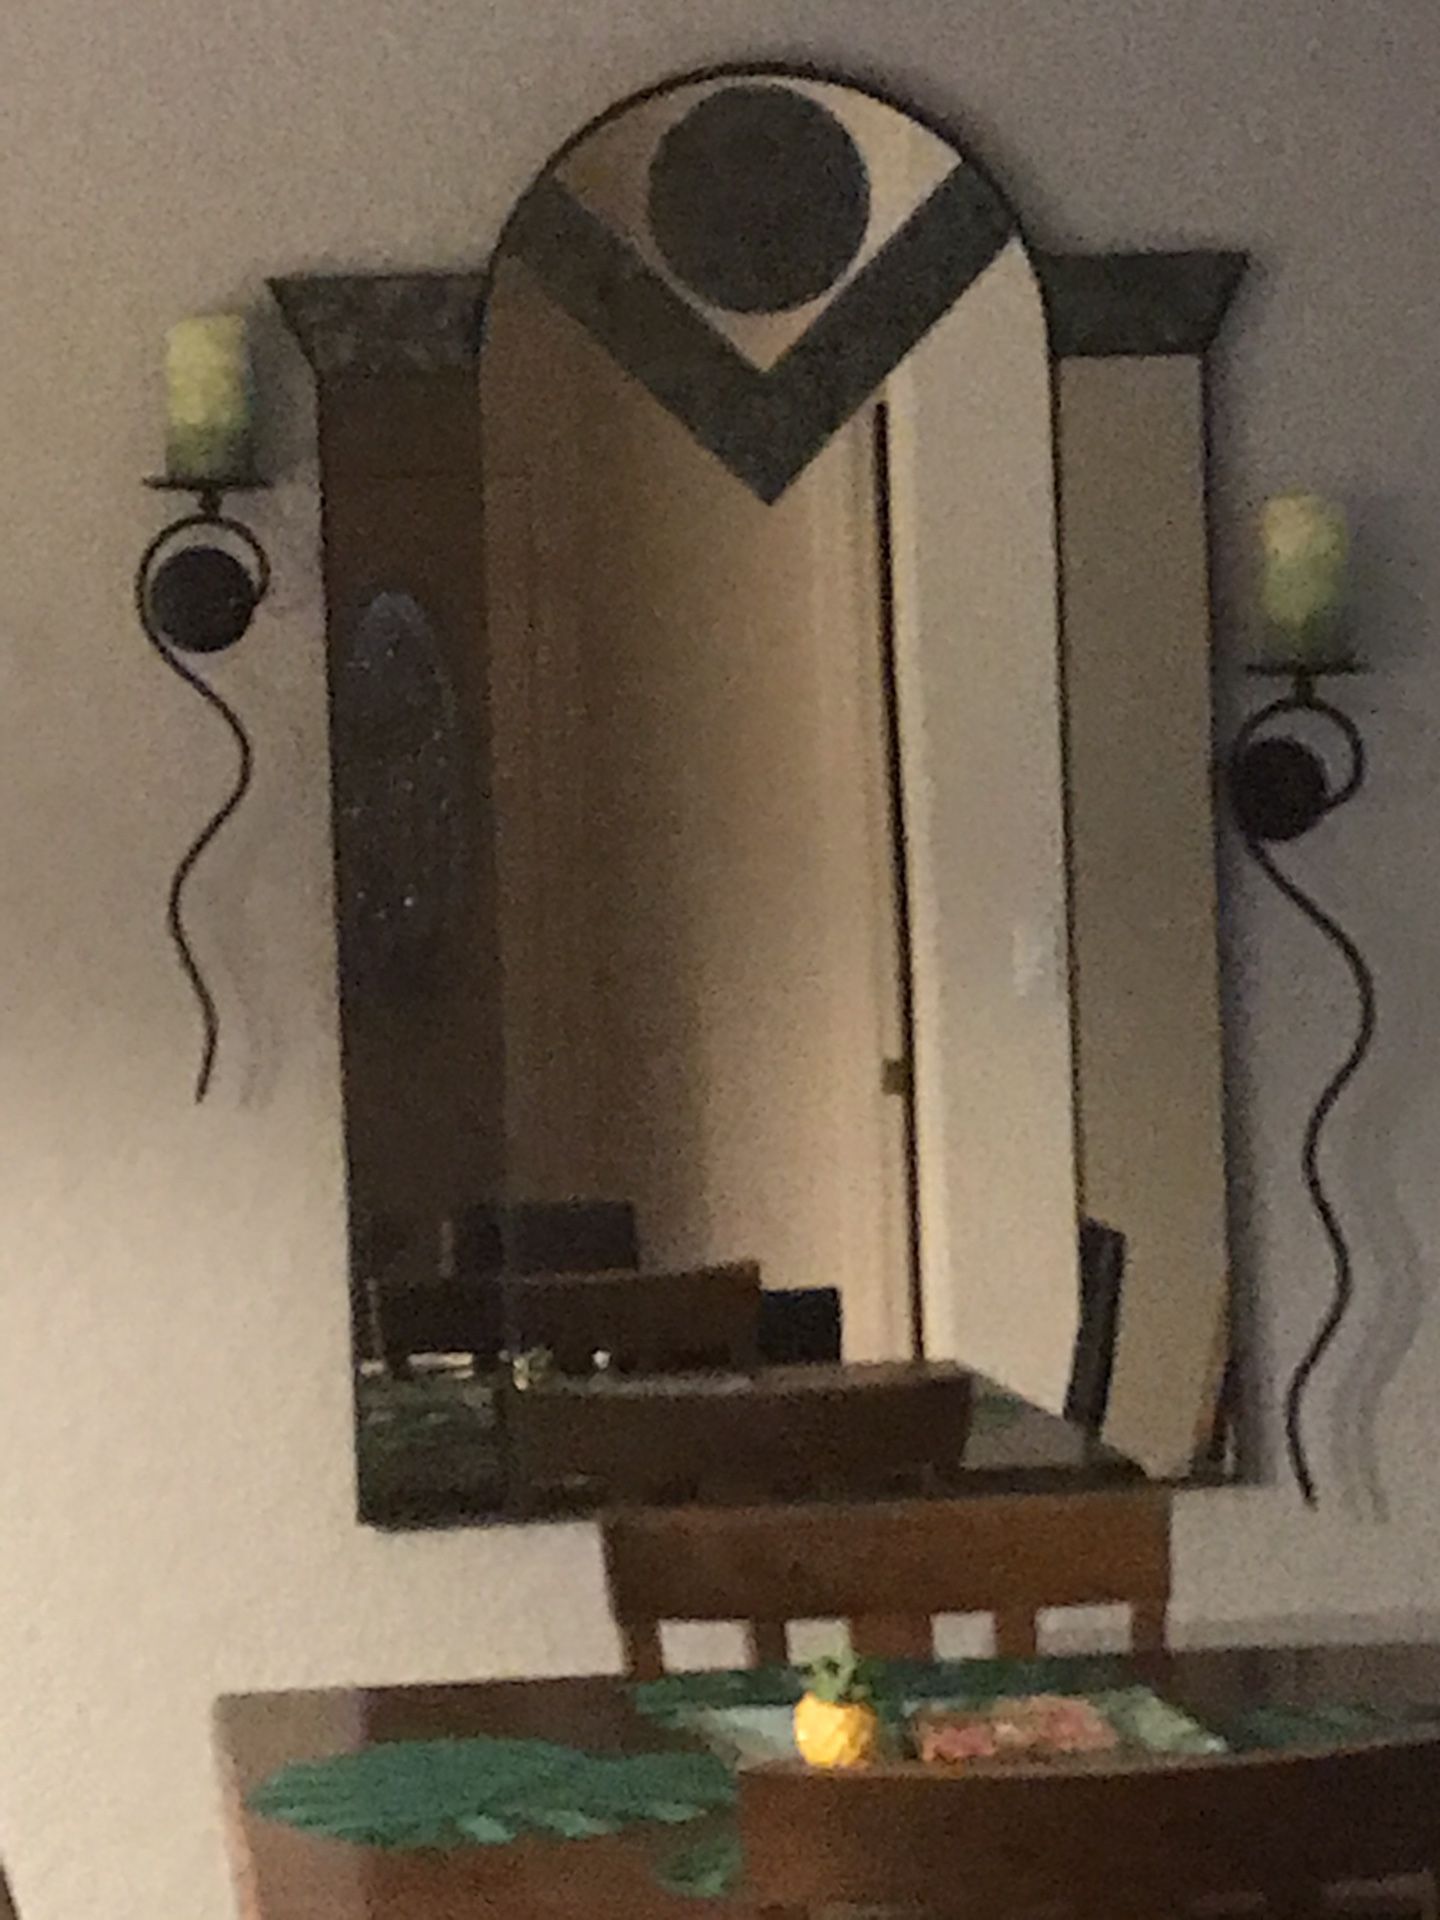 Large mirror and sconce (2) with candles.